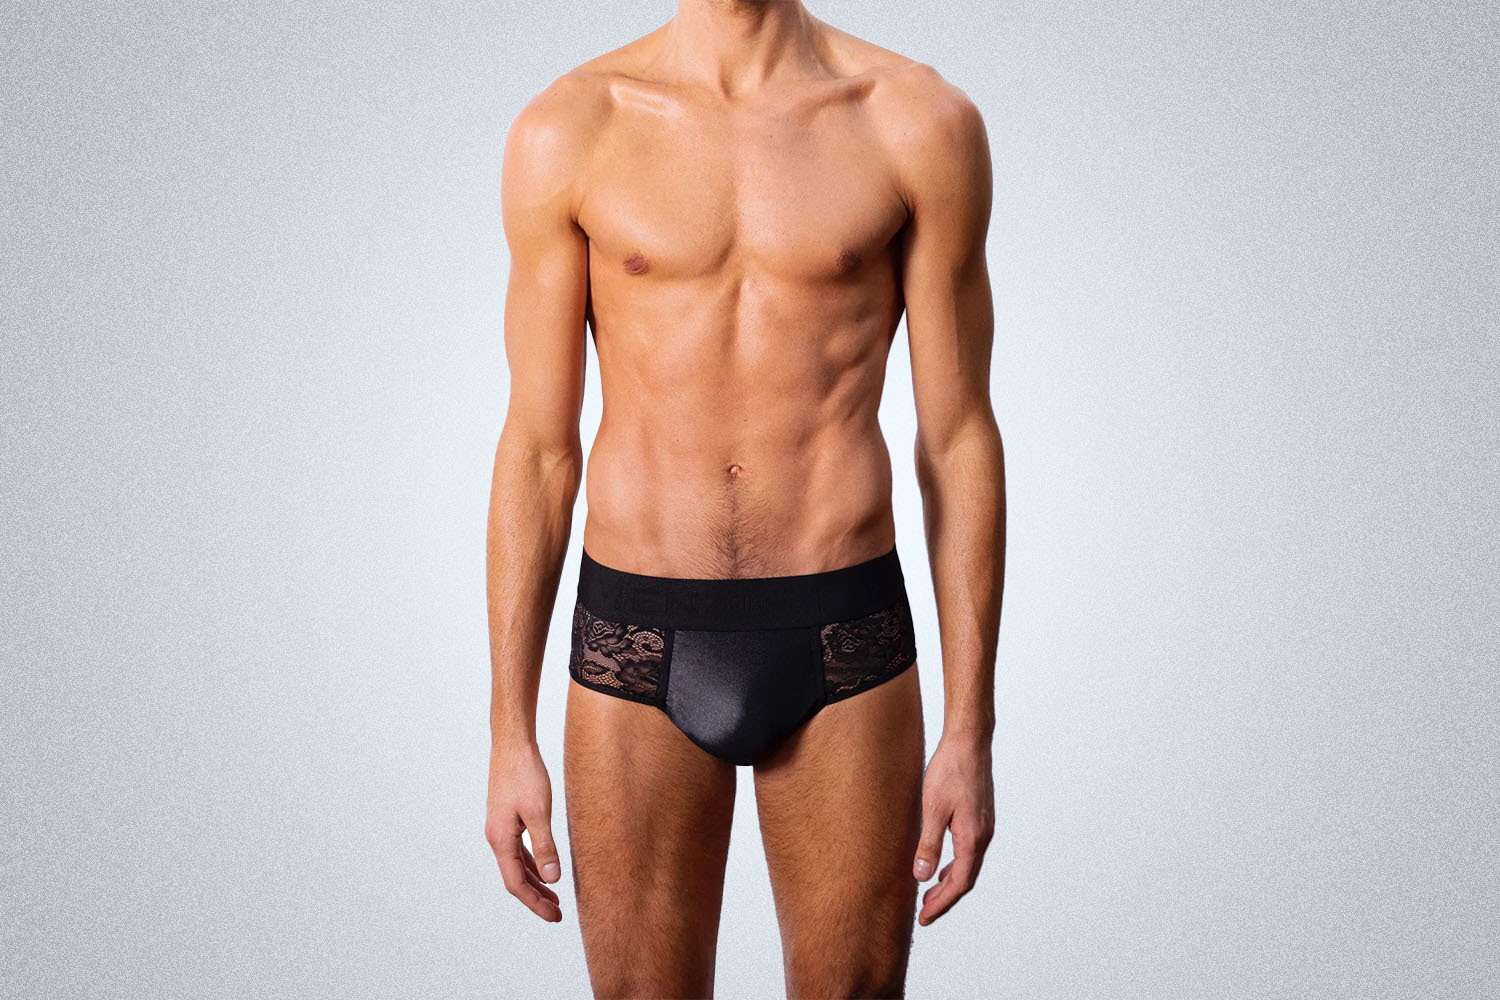 a male model in a pair of lace underwear from Menagerie on a grey background